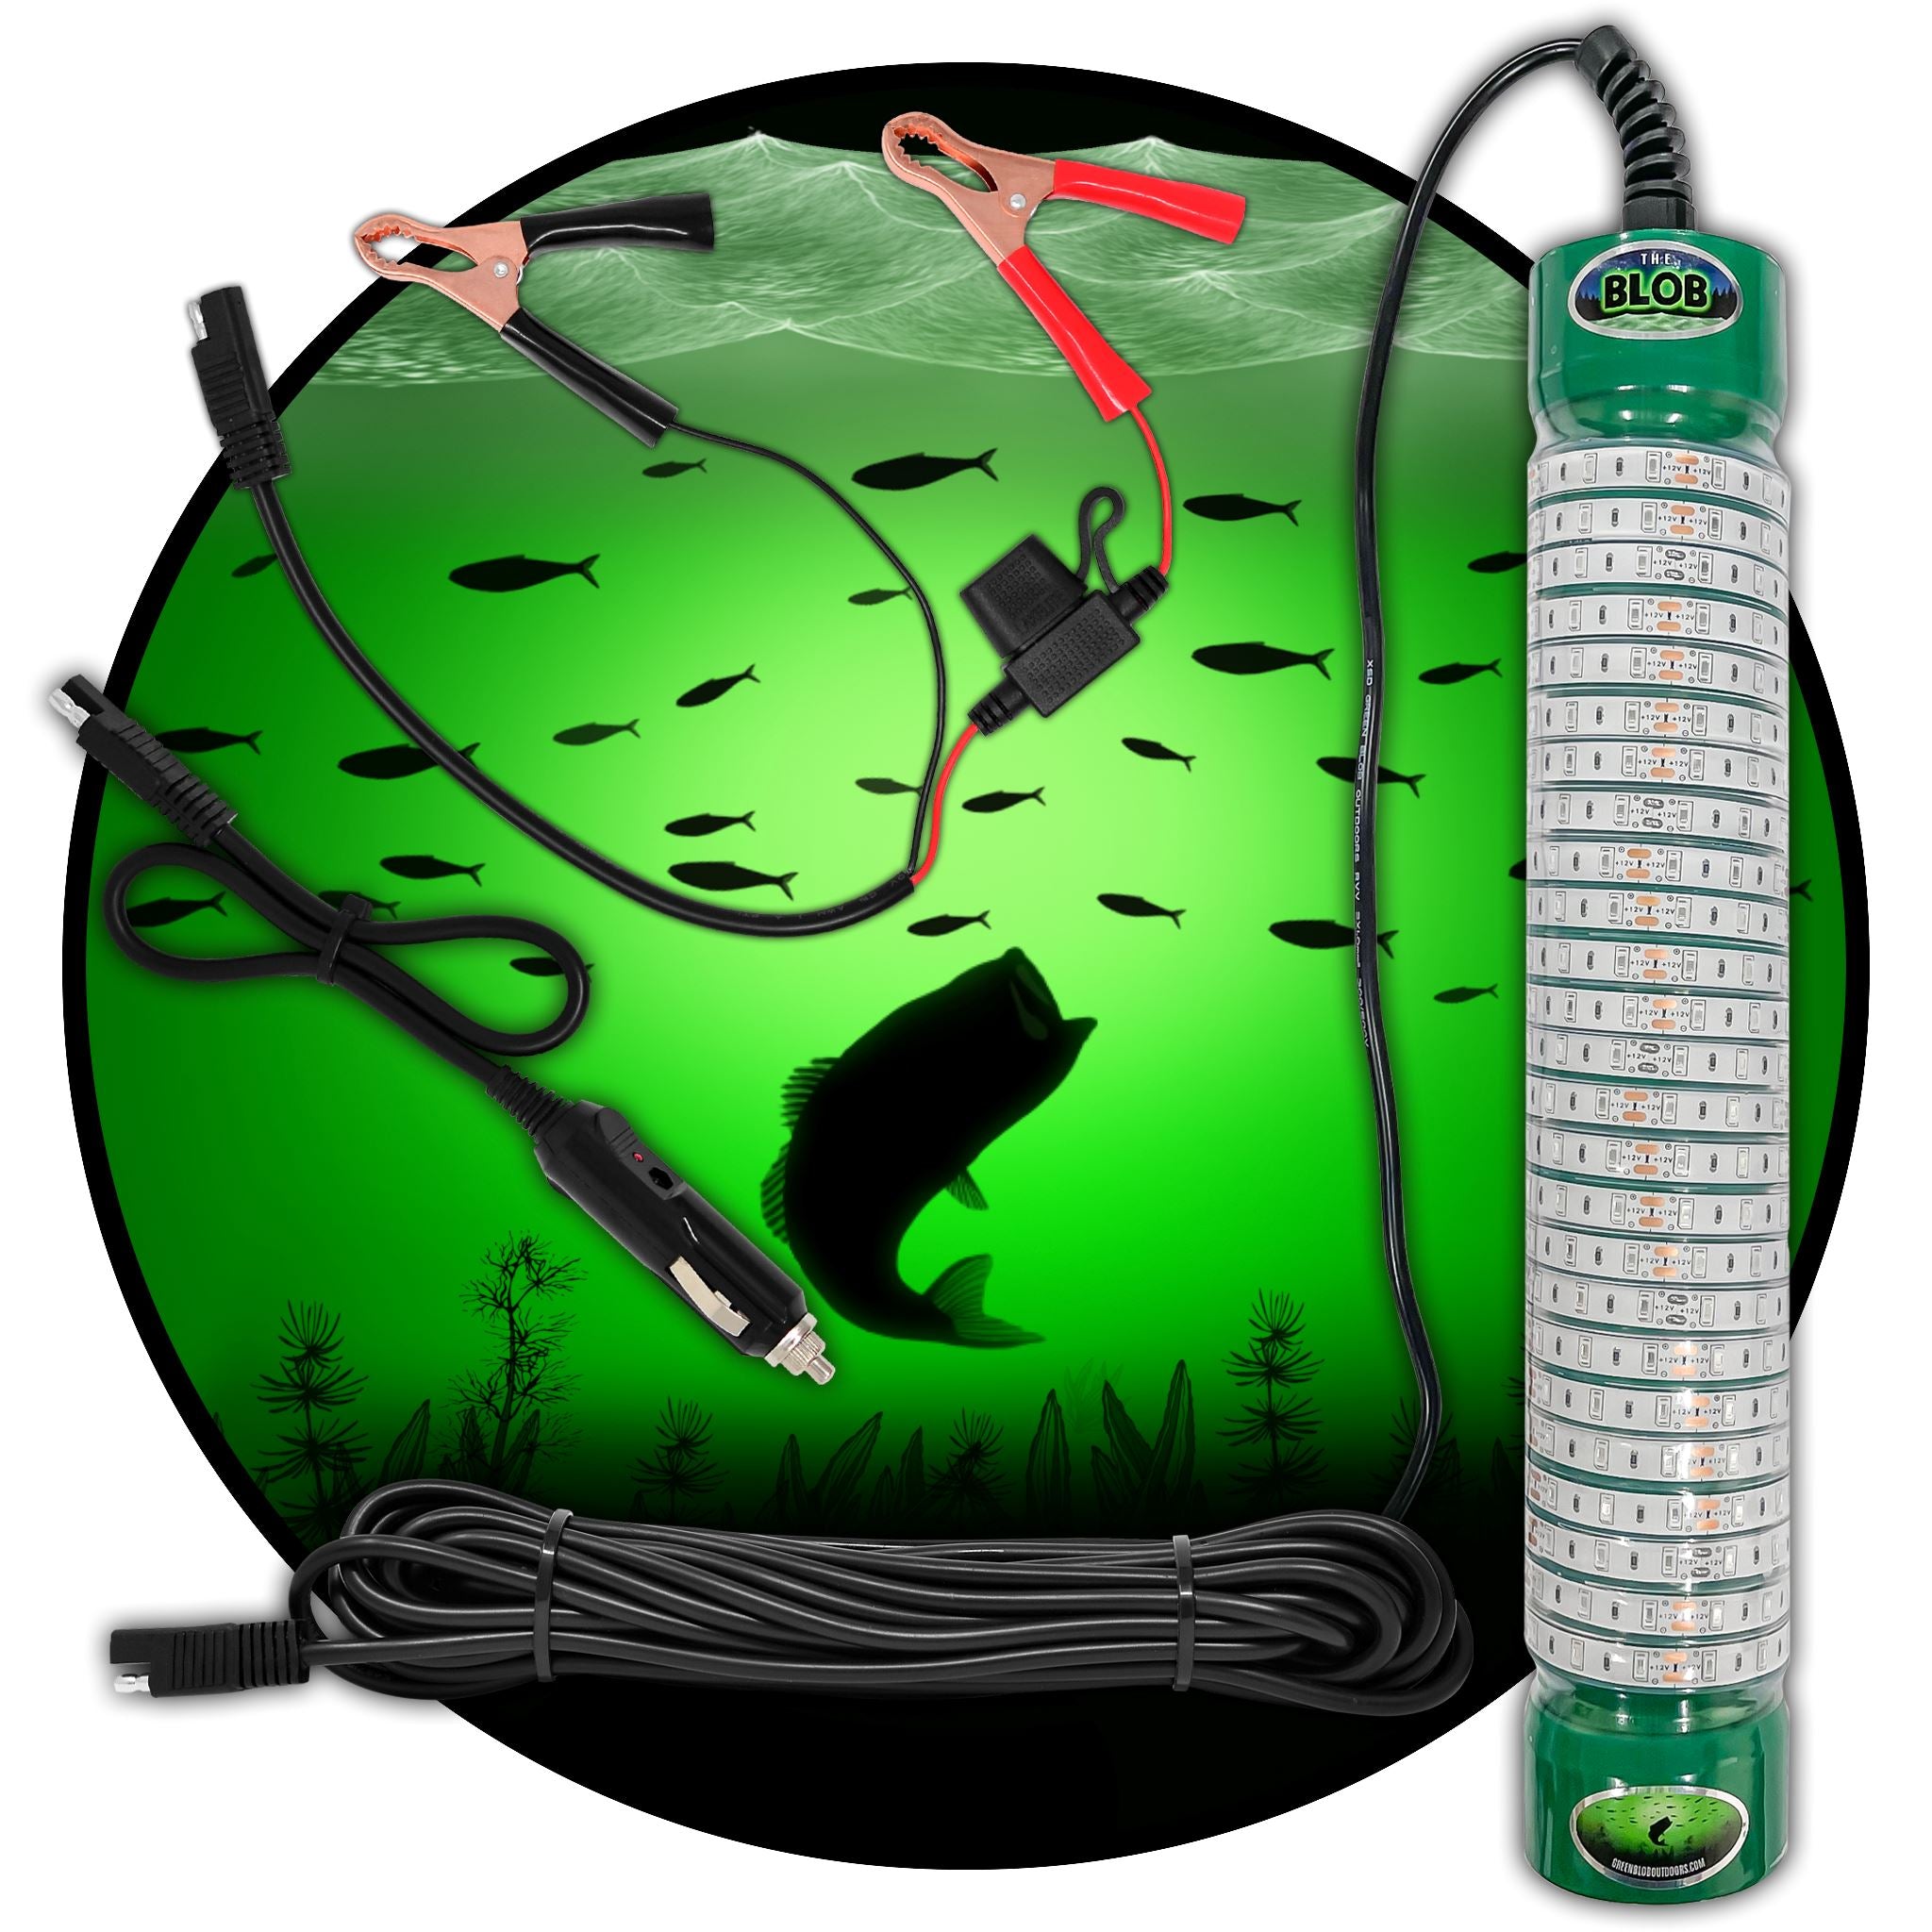 Green Blob Outdoors Underwater Fishing Light 15000 Lumen with Alligator Clips and Cigarette Lighter Adapter with 30ft Cord, Green Color